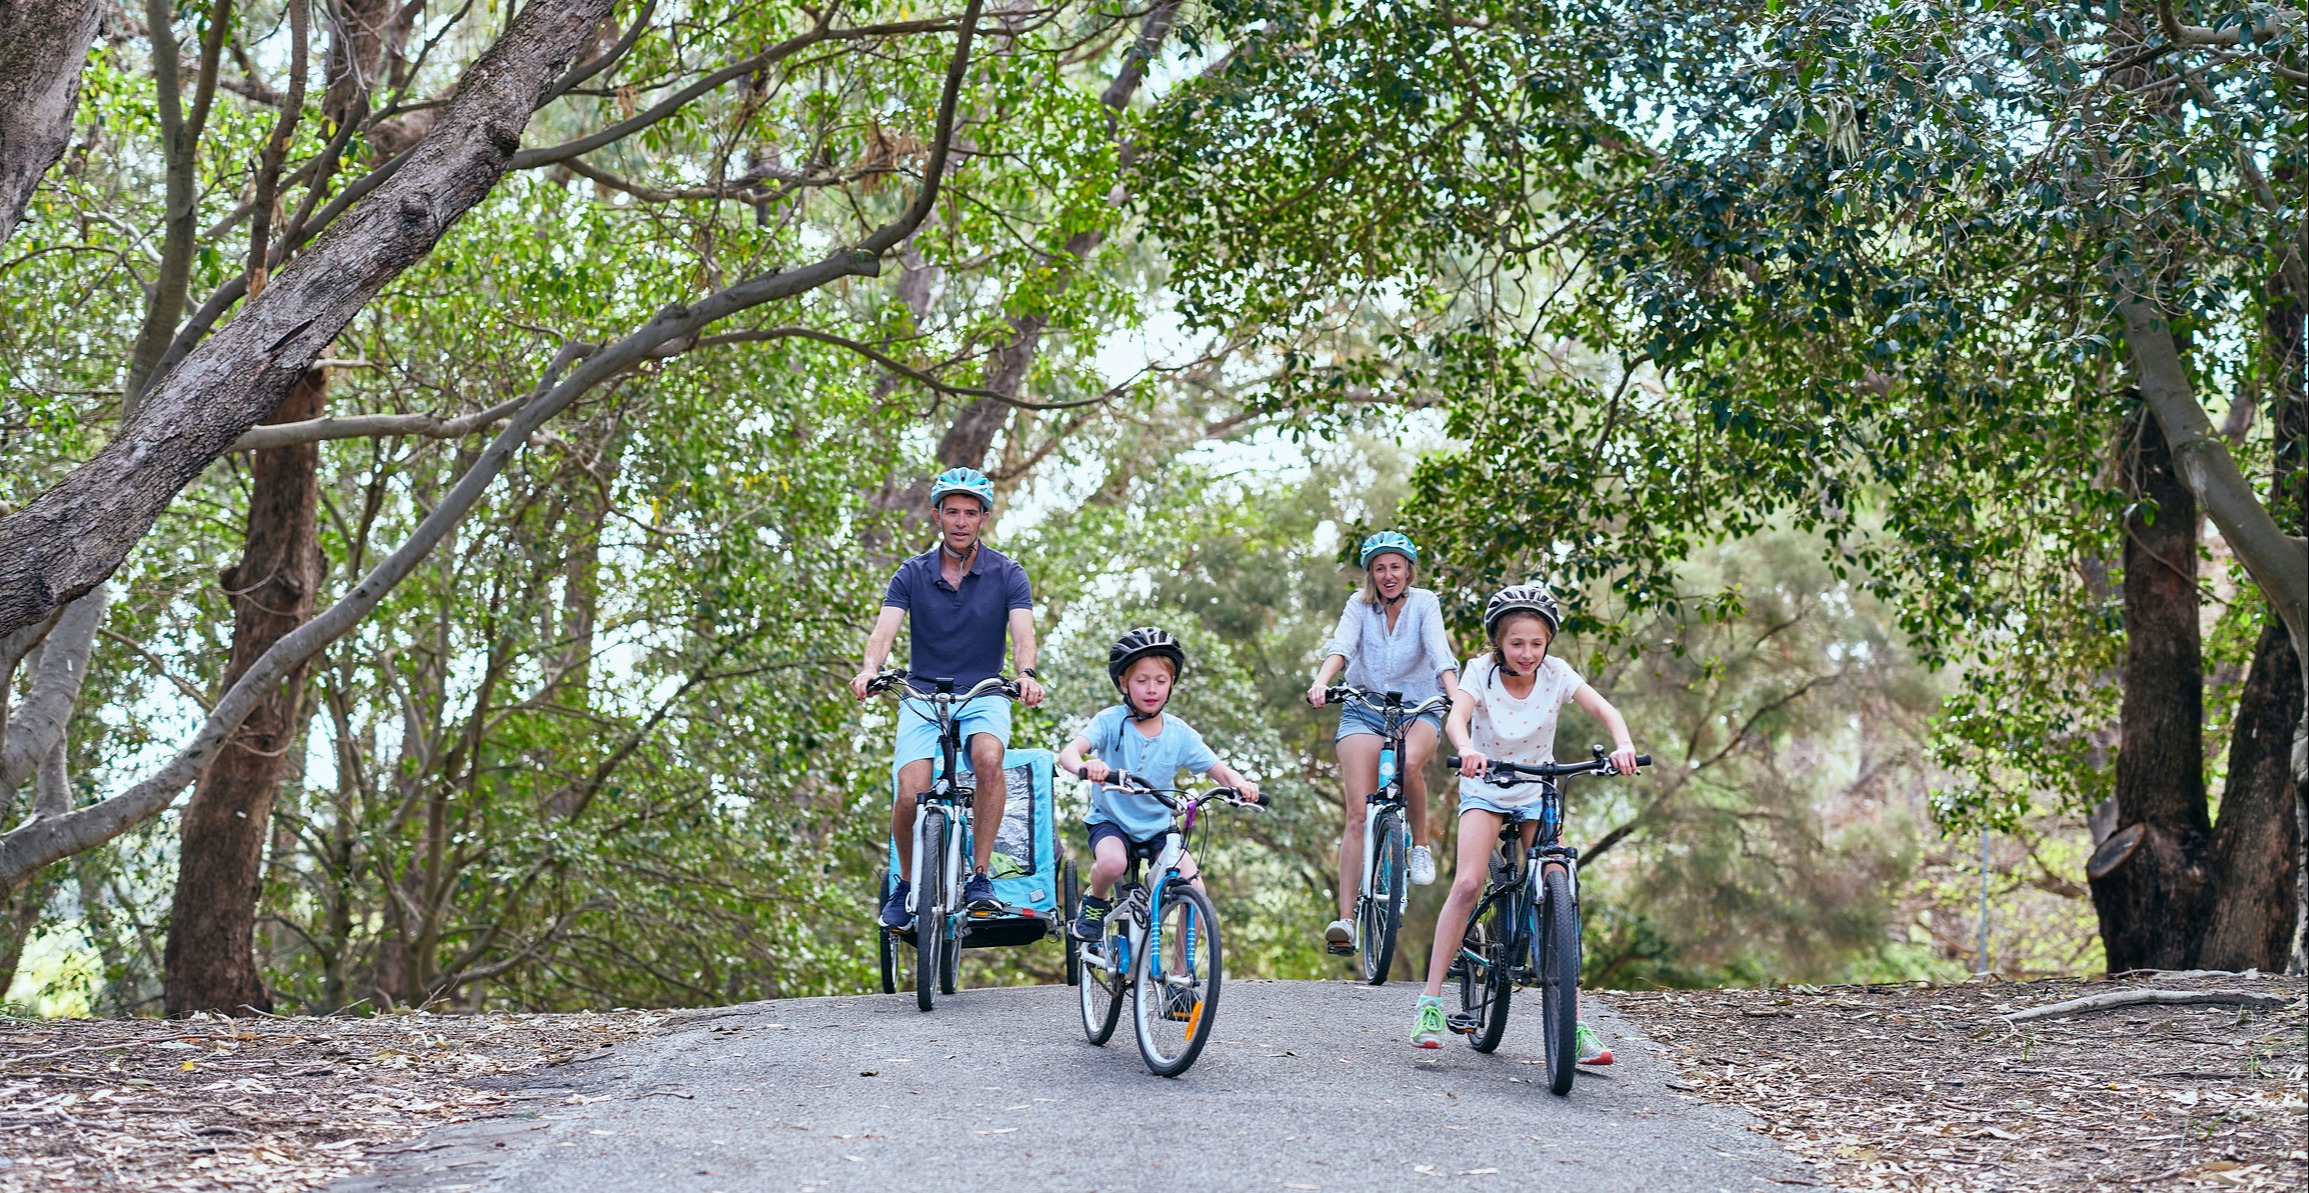 Cycling in Thomson Bay